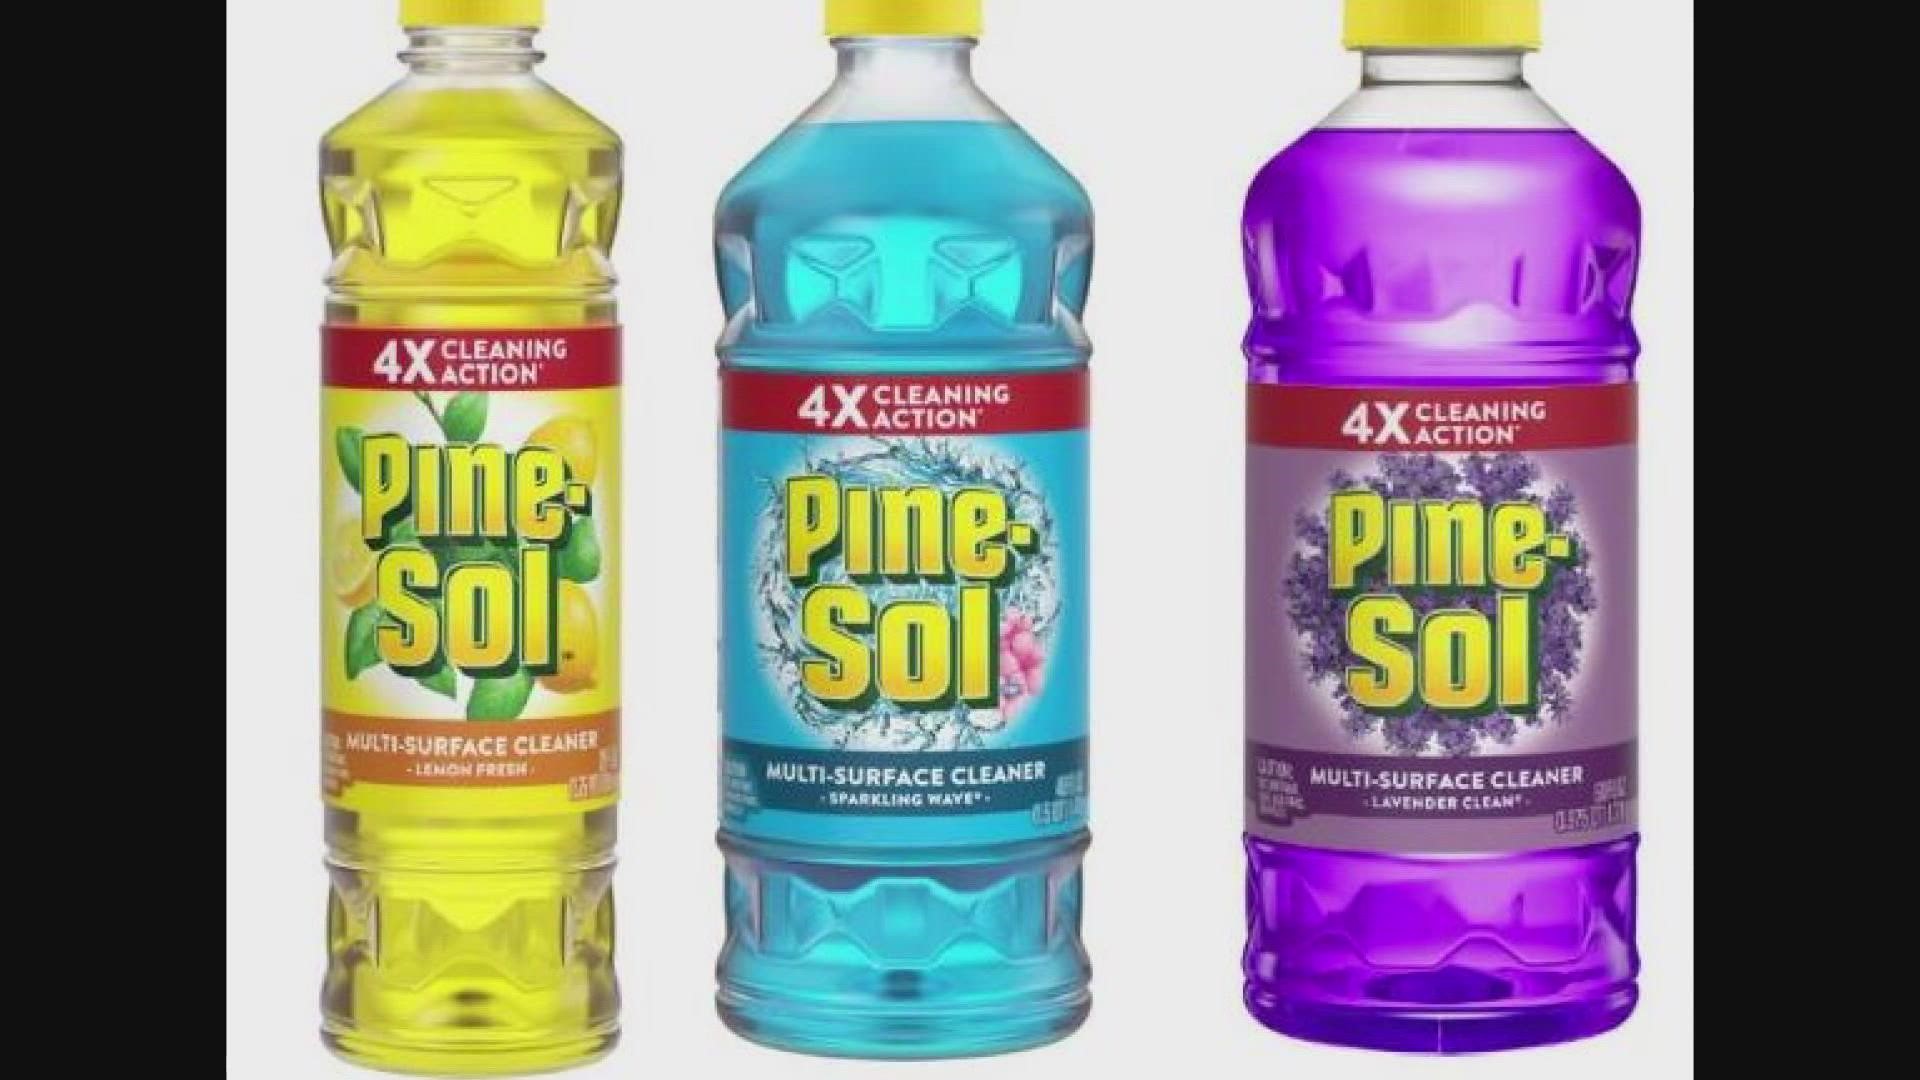 Clorox is recalling some varieties of its Pine-Sol brand cleaners due to bacterial contamination. The company says the product should be thrown out immediately.